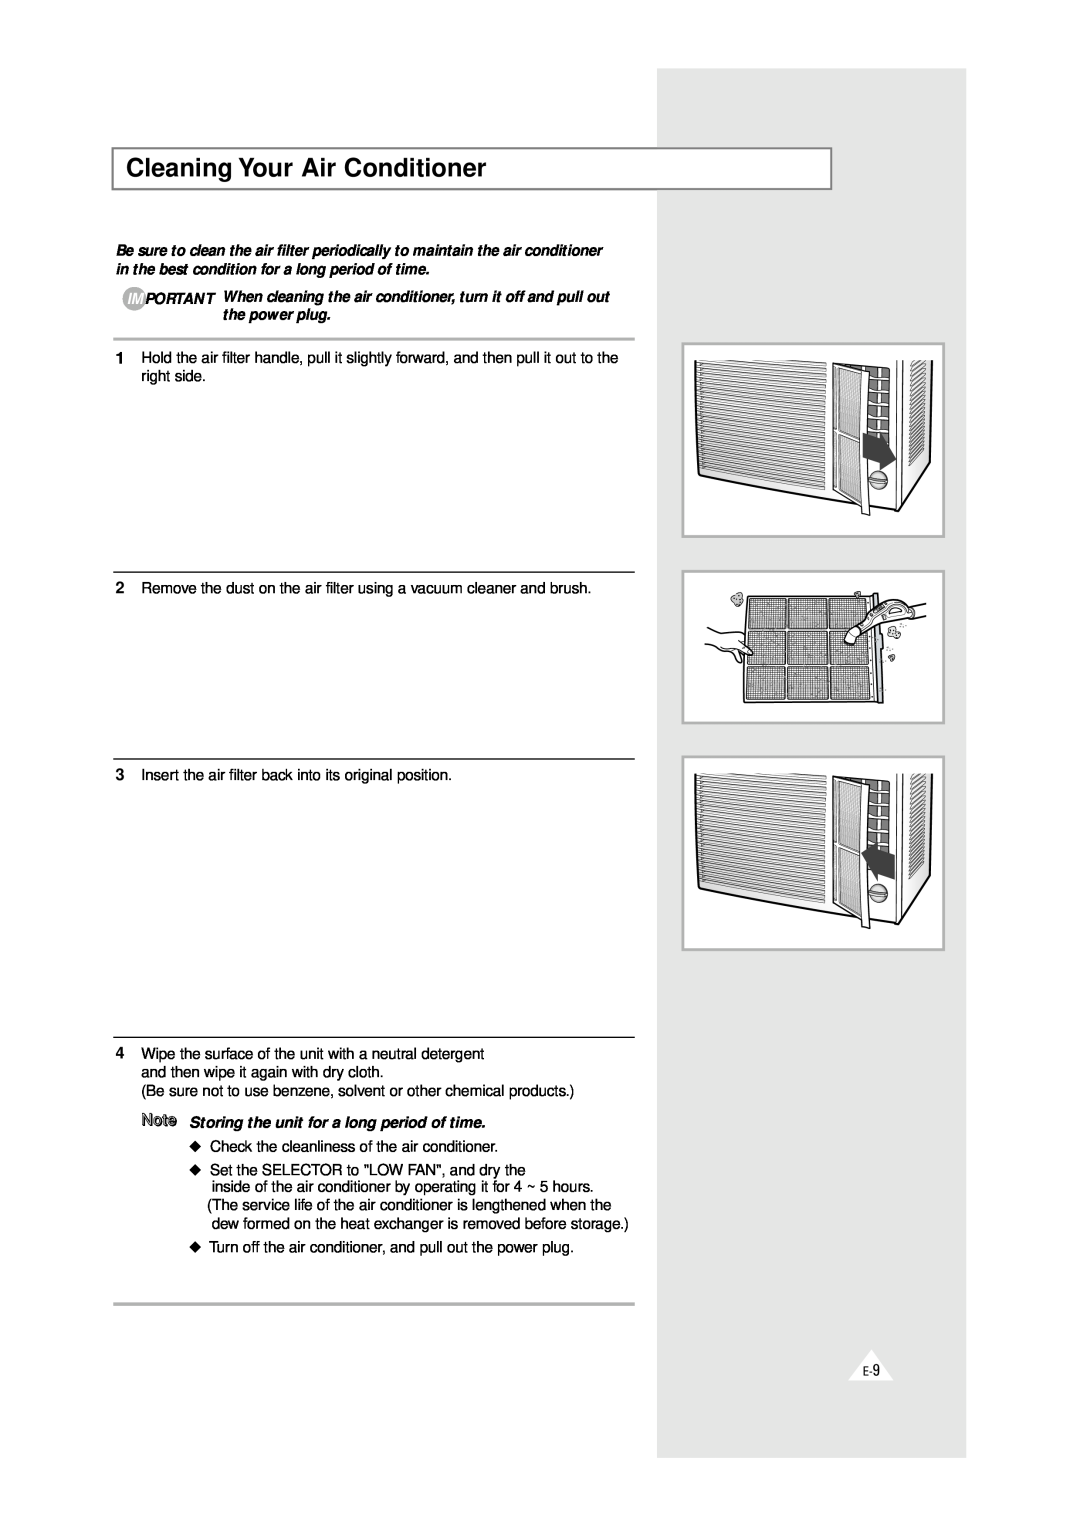 Samsung AW0600, AW0510D, AW0510B, AW0610A Cleaning Your Air Conditioner, Note Storing the unit for a long period of time 